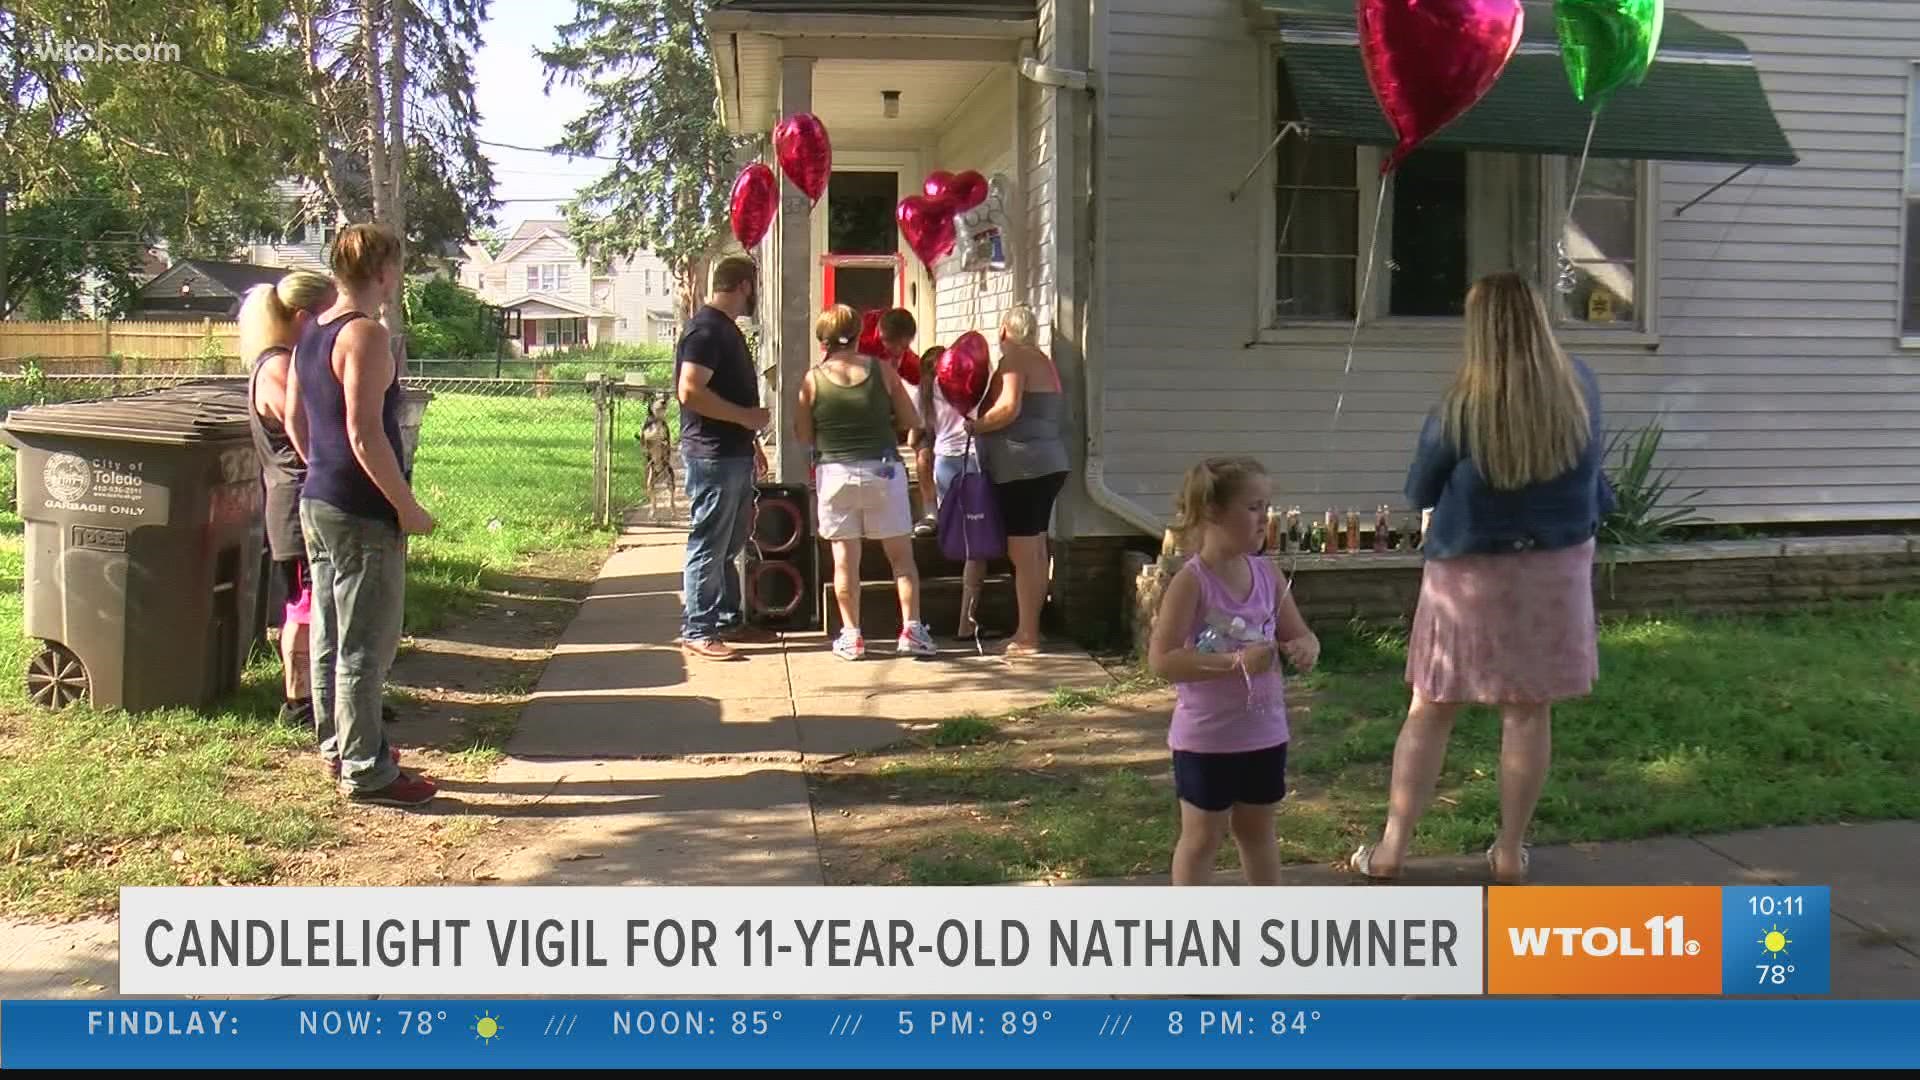 The family held a candelight vigil Friday afternoon to mourn and honor Nathan Sumner, who was shot while playing outside of his own home.